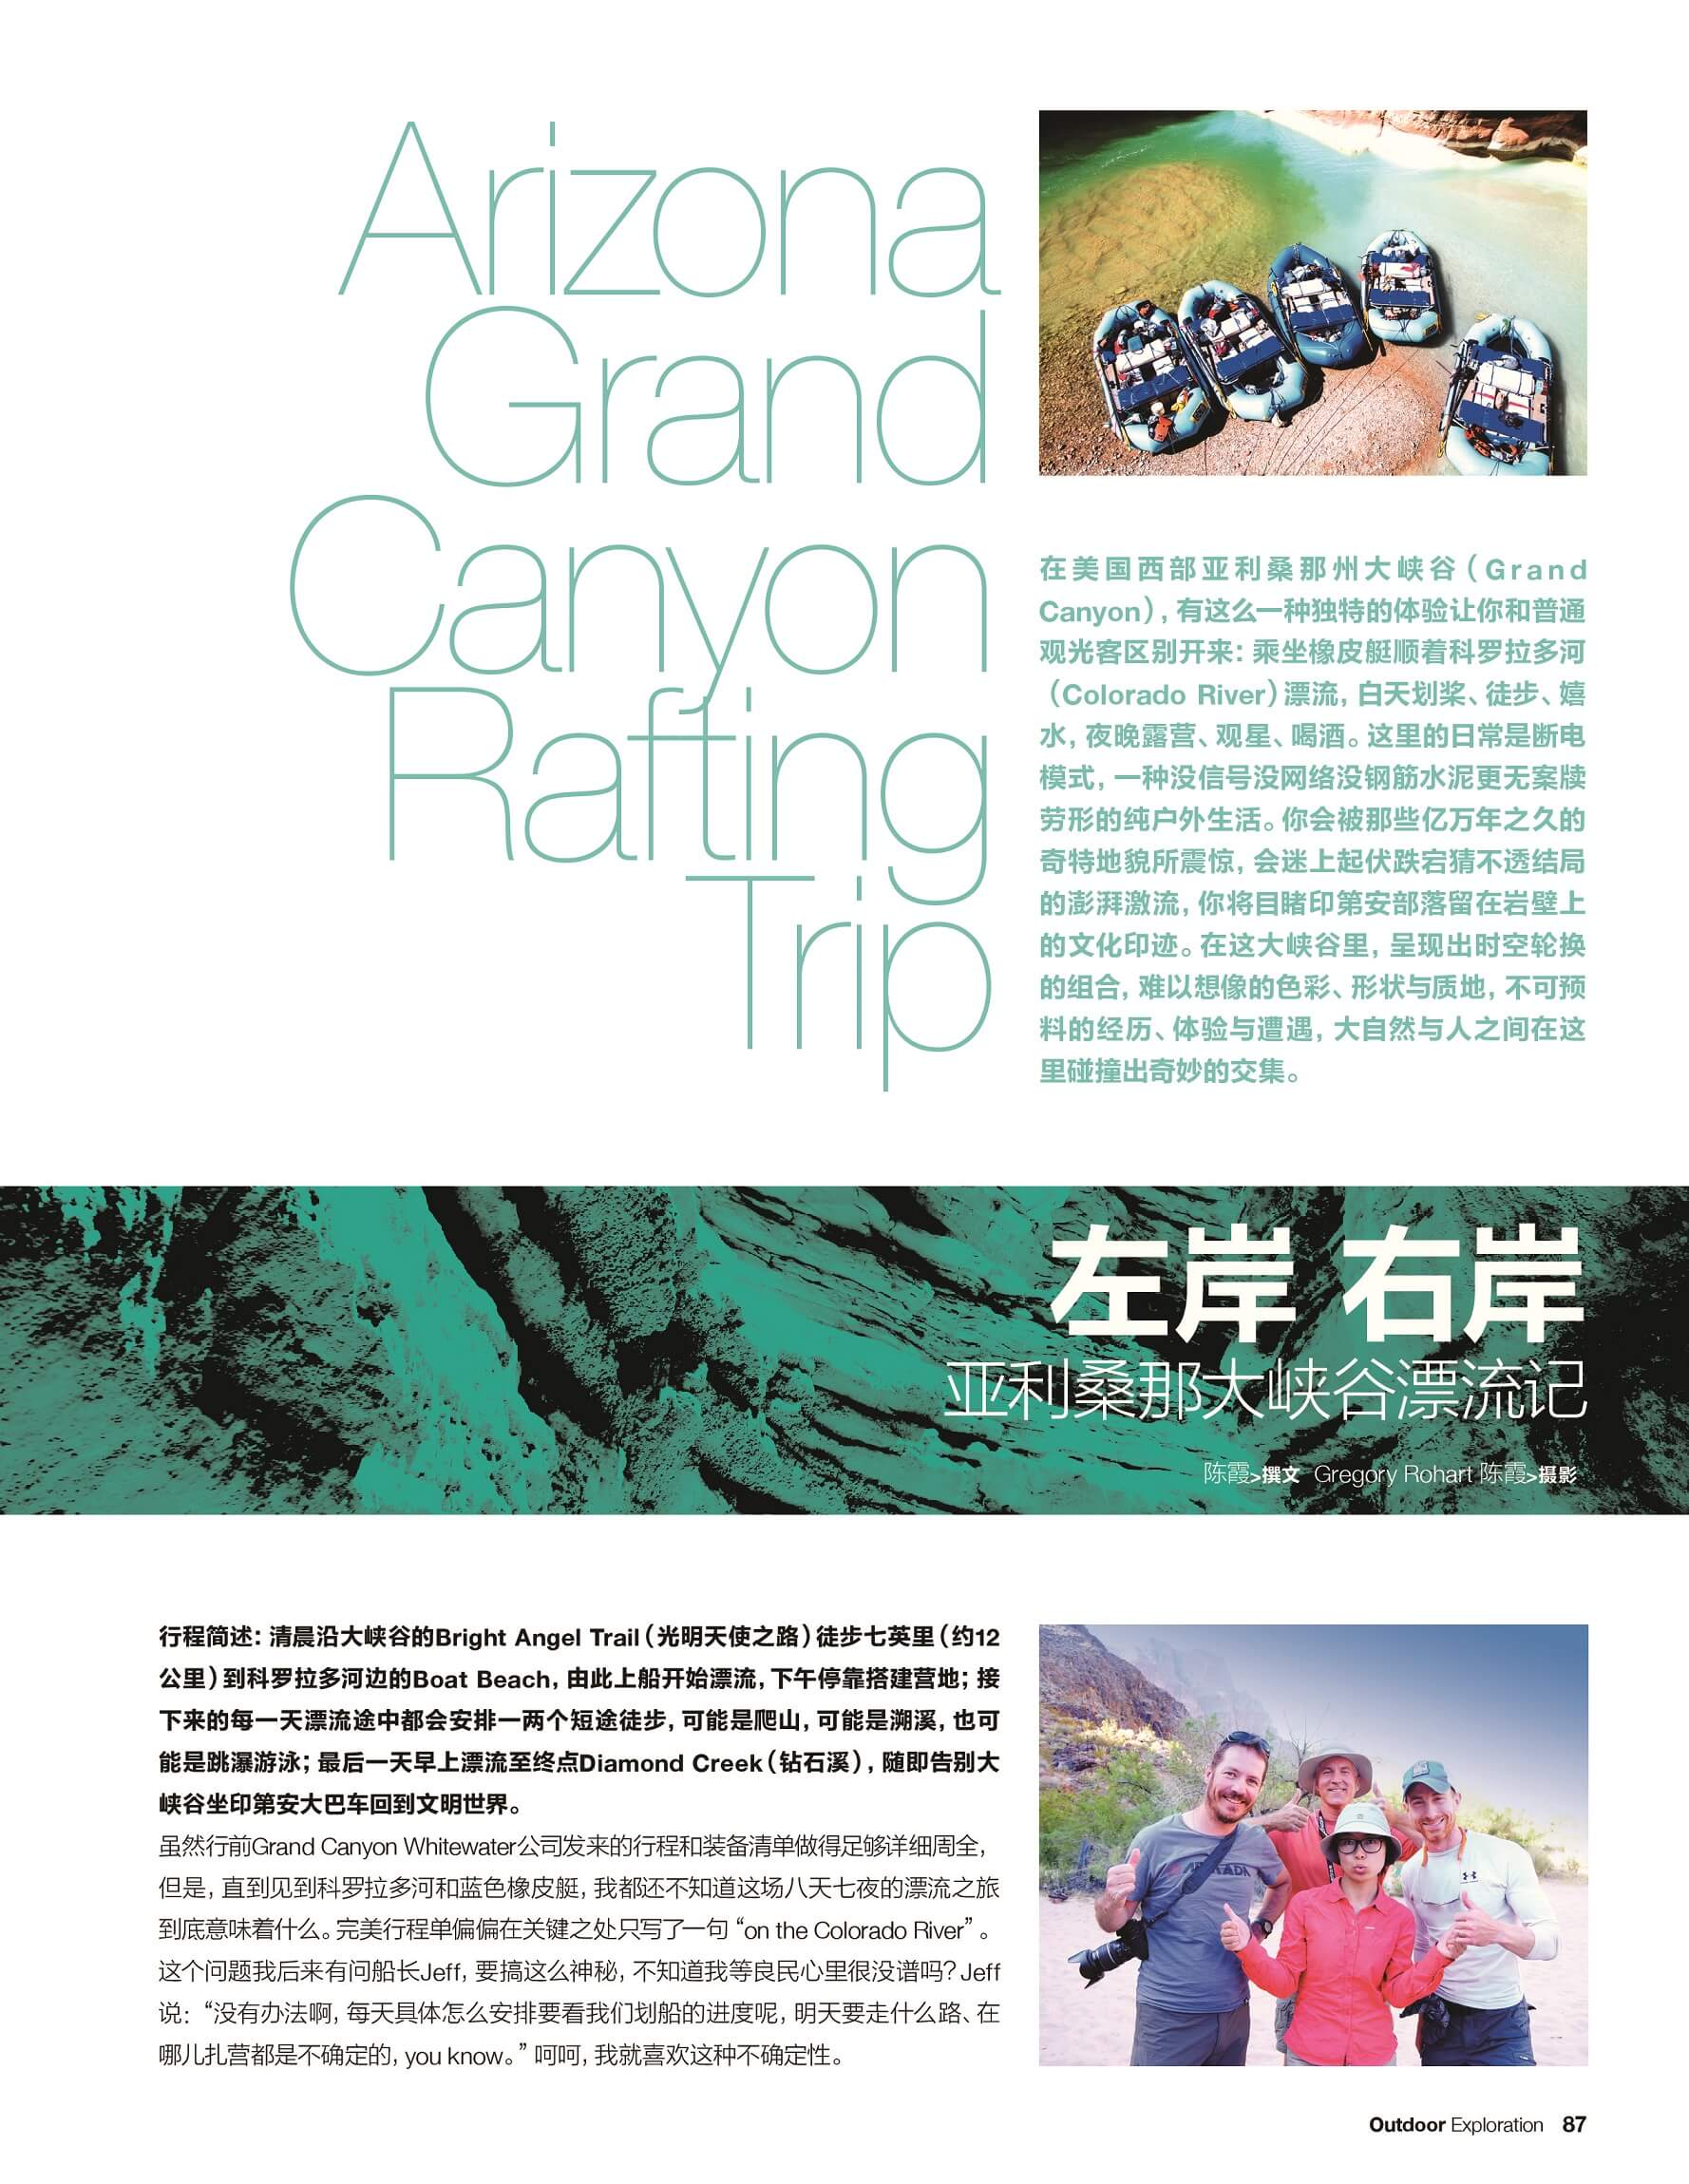 China's Outdoor Exploration Publication featuring Grand Canyon Whitewater